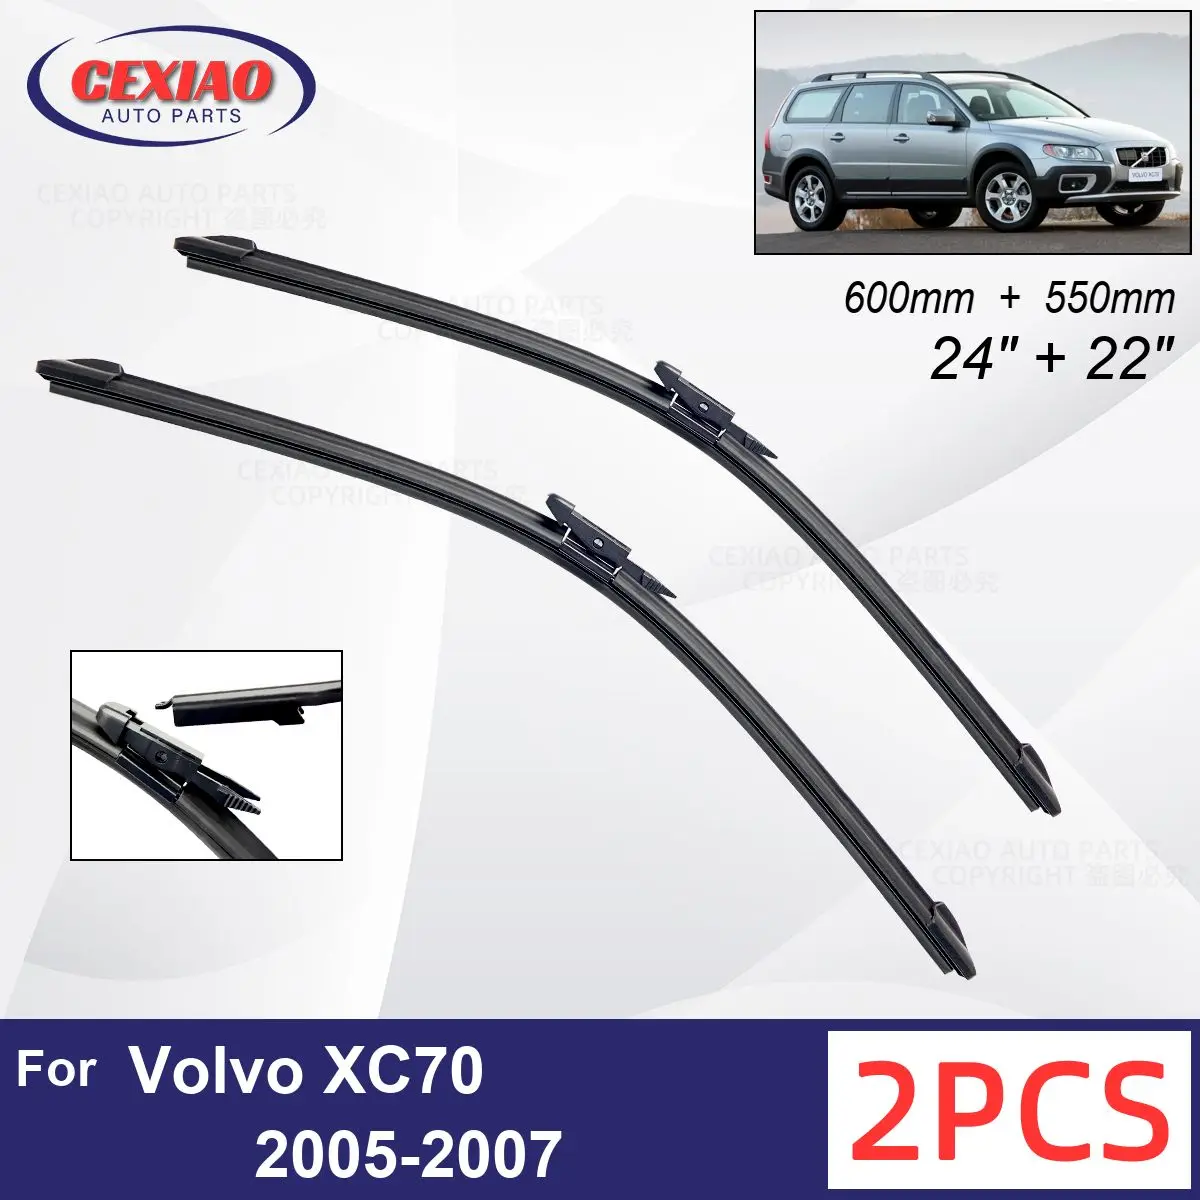 

Car Wiper For Volvo S80 2003-2006 Front Wiper Blades Soft Rubber Windscreen Wipers Auto Windshield 24" 22" 600mm 550mm